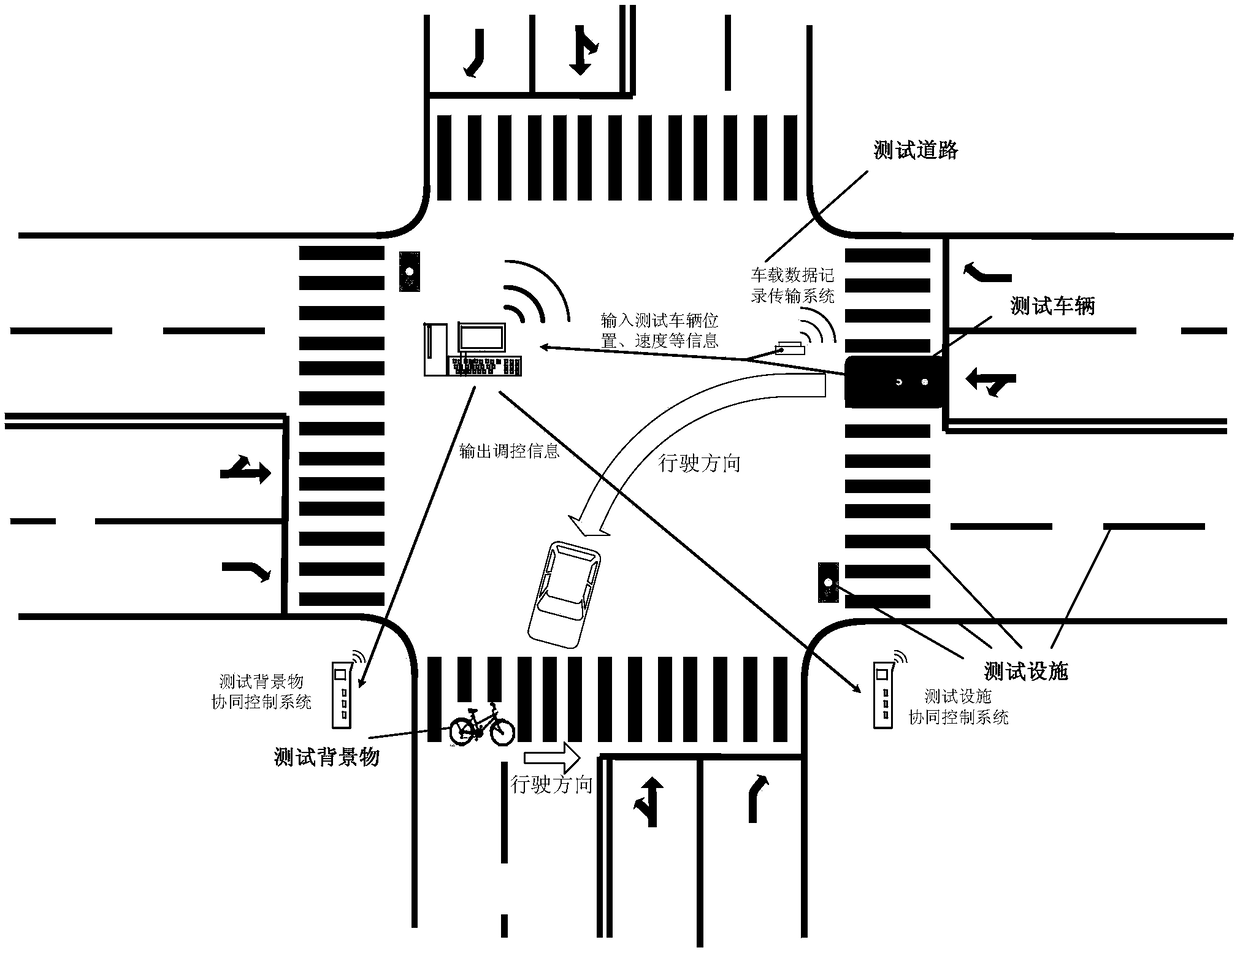 Automatic drive vehicle test scene construction method based on traffic accident case deconstruction, and test method